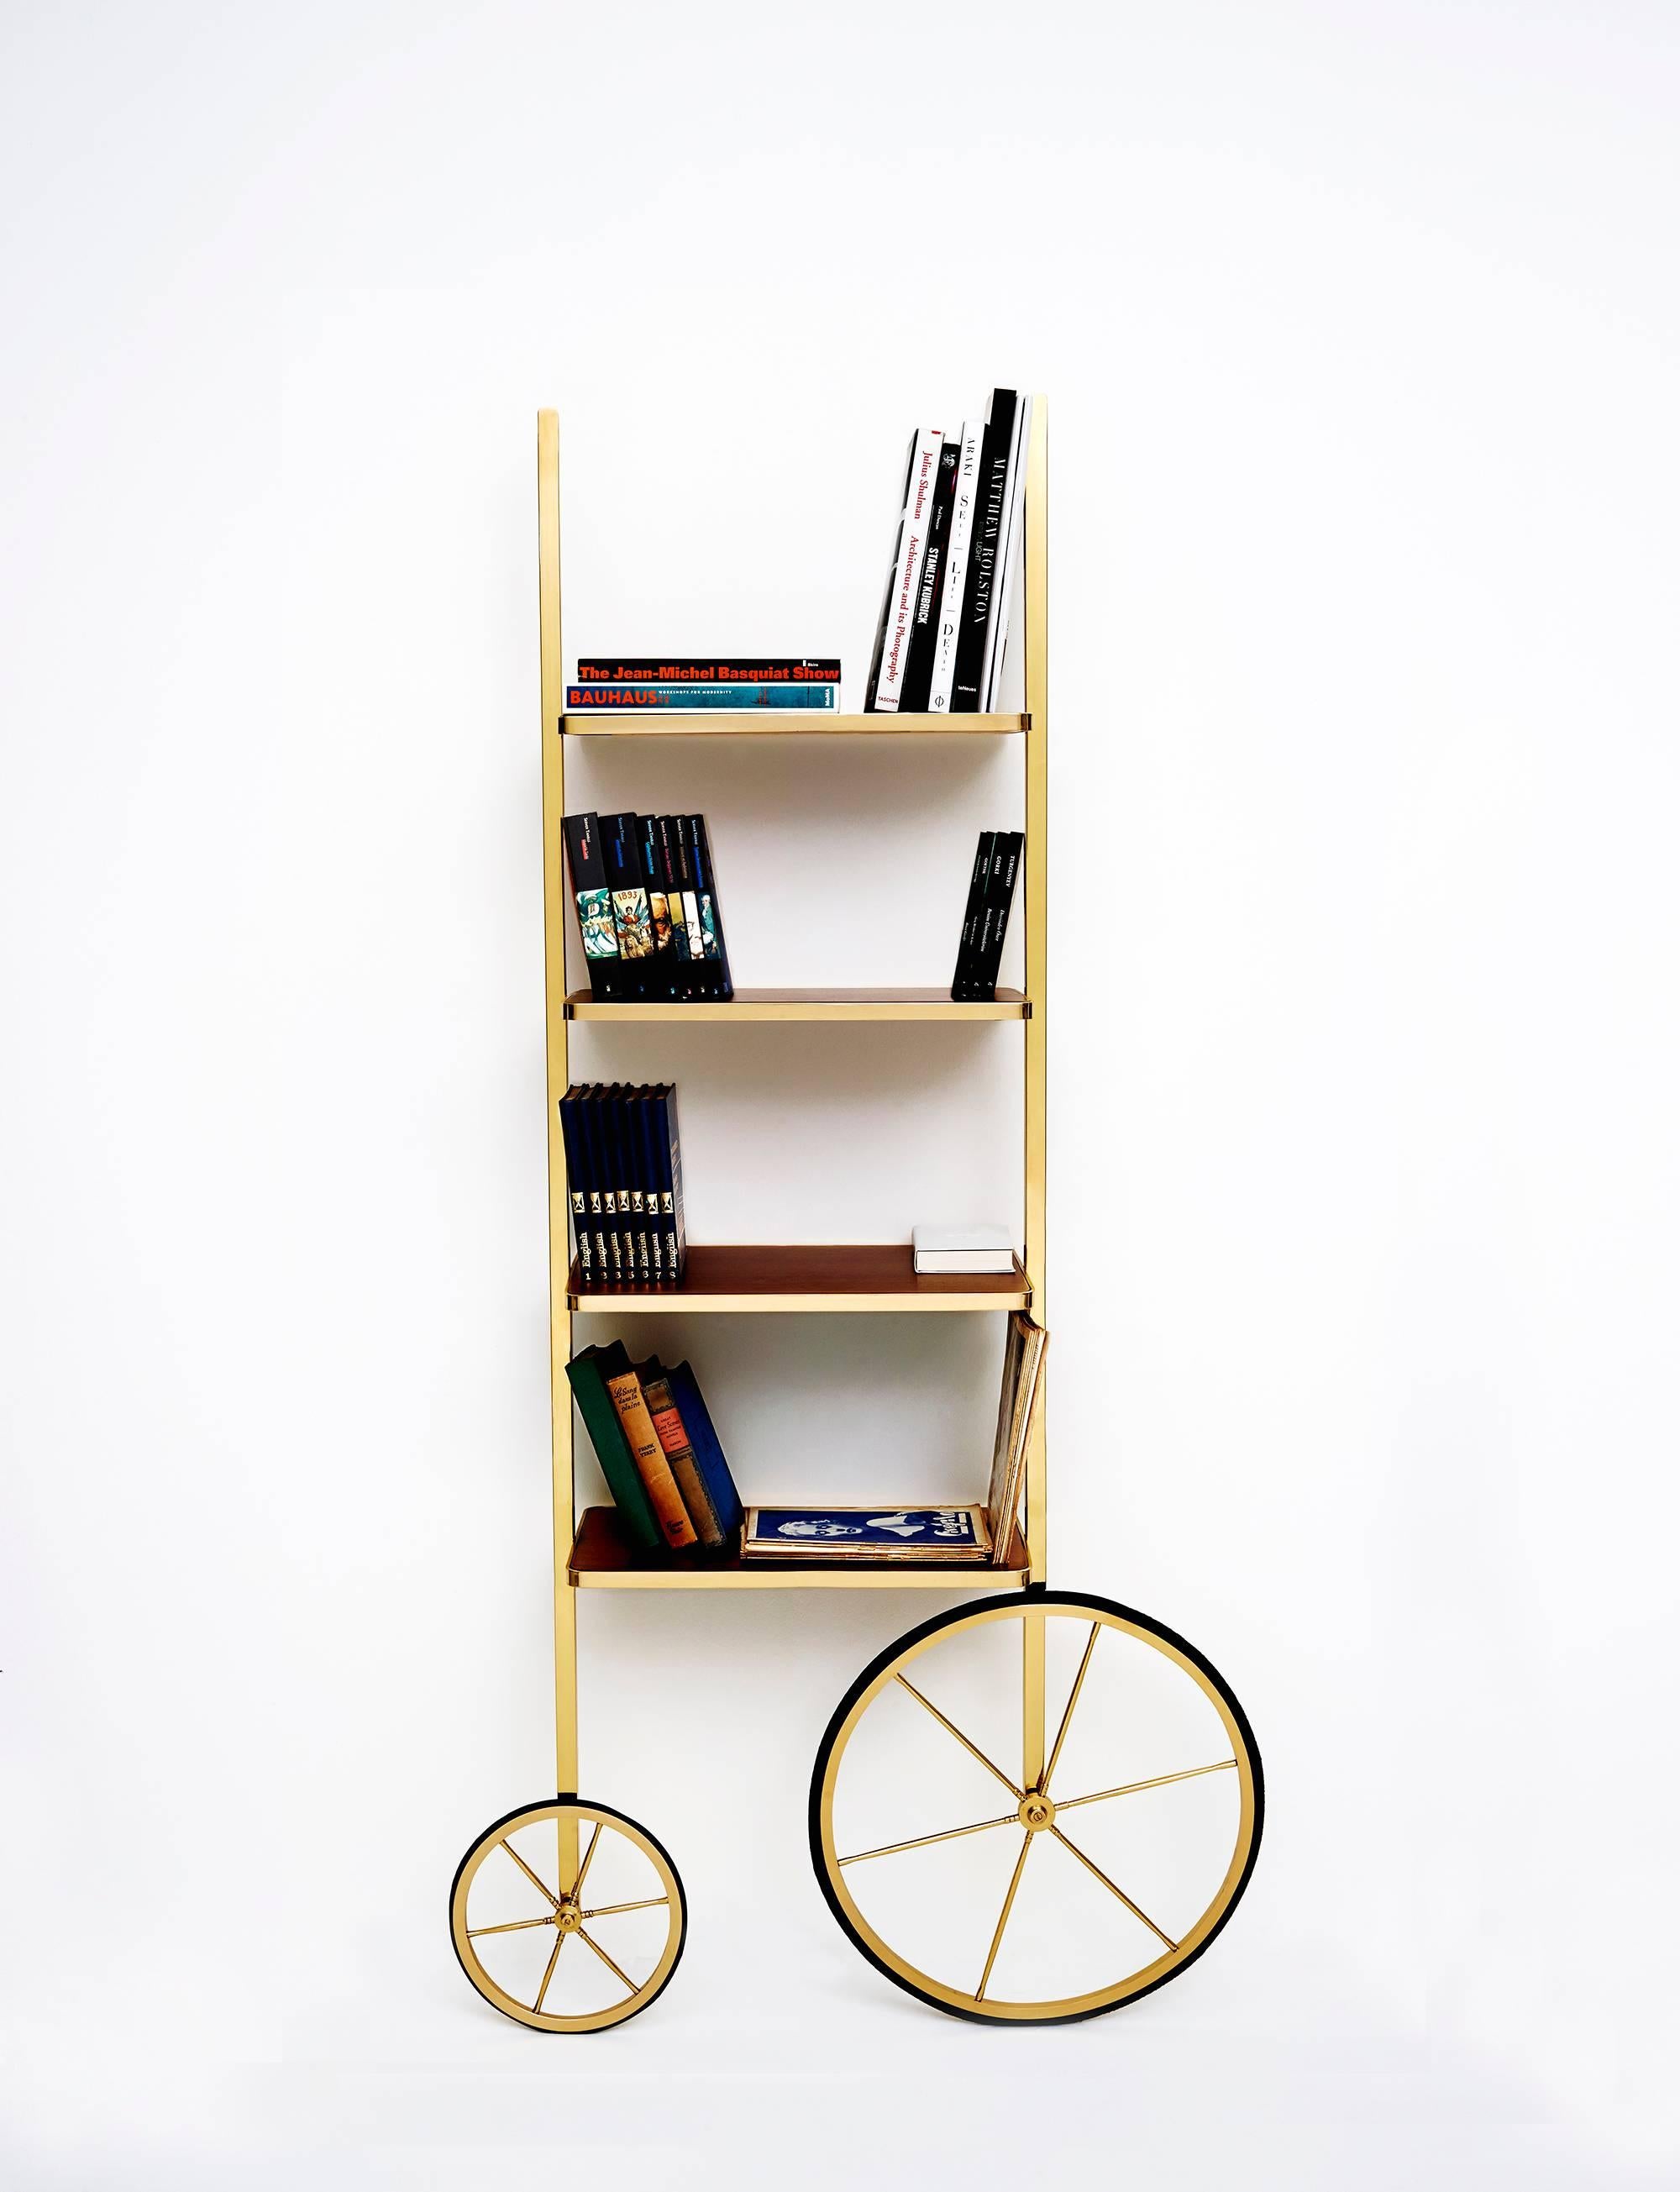 The design for Cyclopedia stems from the high wheel bicycles of the 1870s. Unlike most bookshelves, Cyclopedia differentiates itself through its portable structure. This unique piece is a library and a display shelf that can be wheeled and